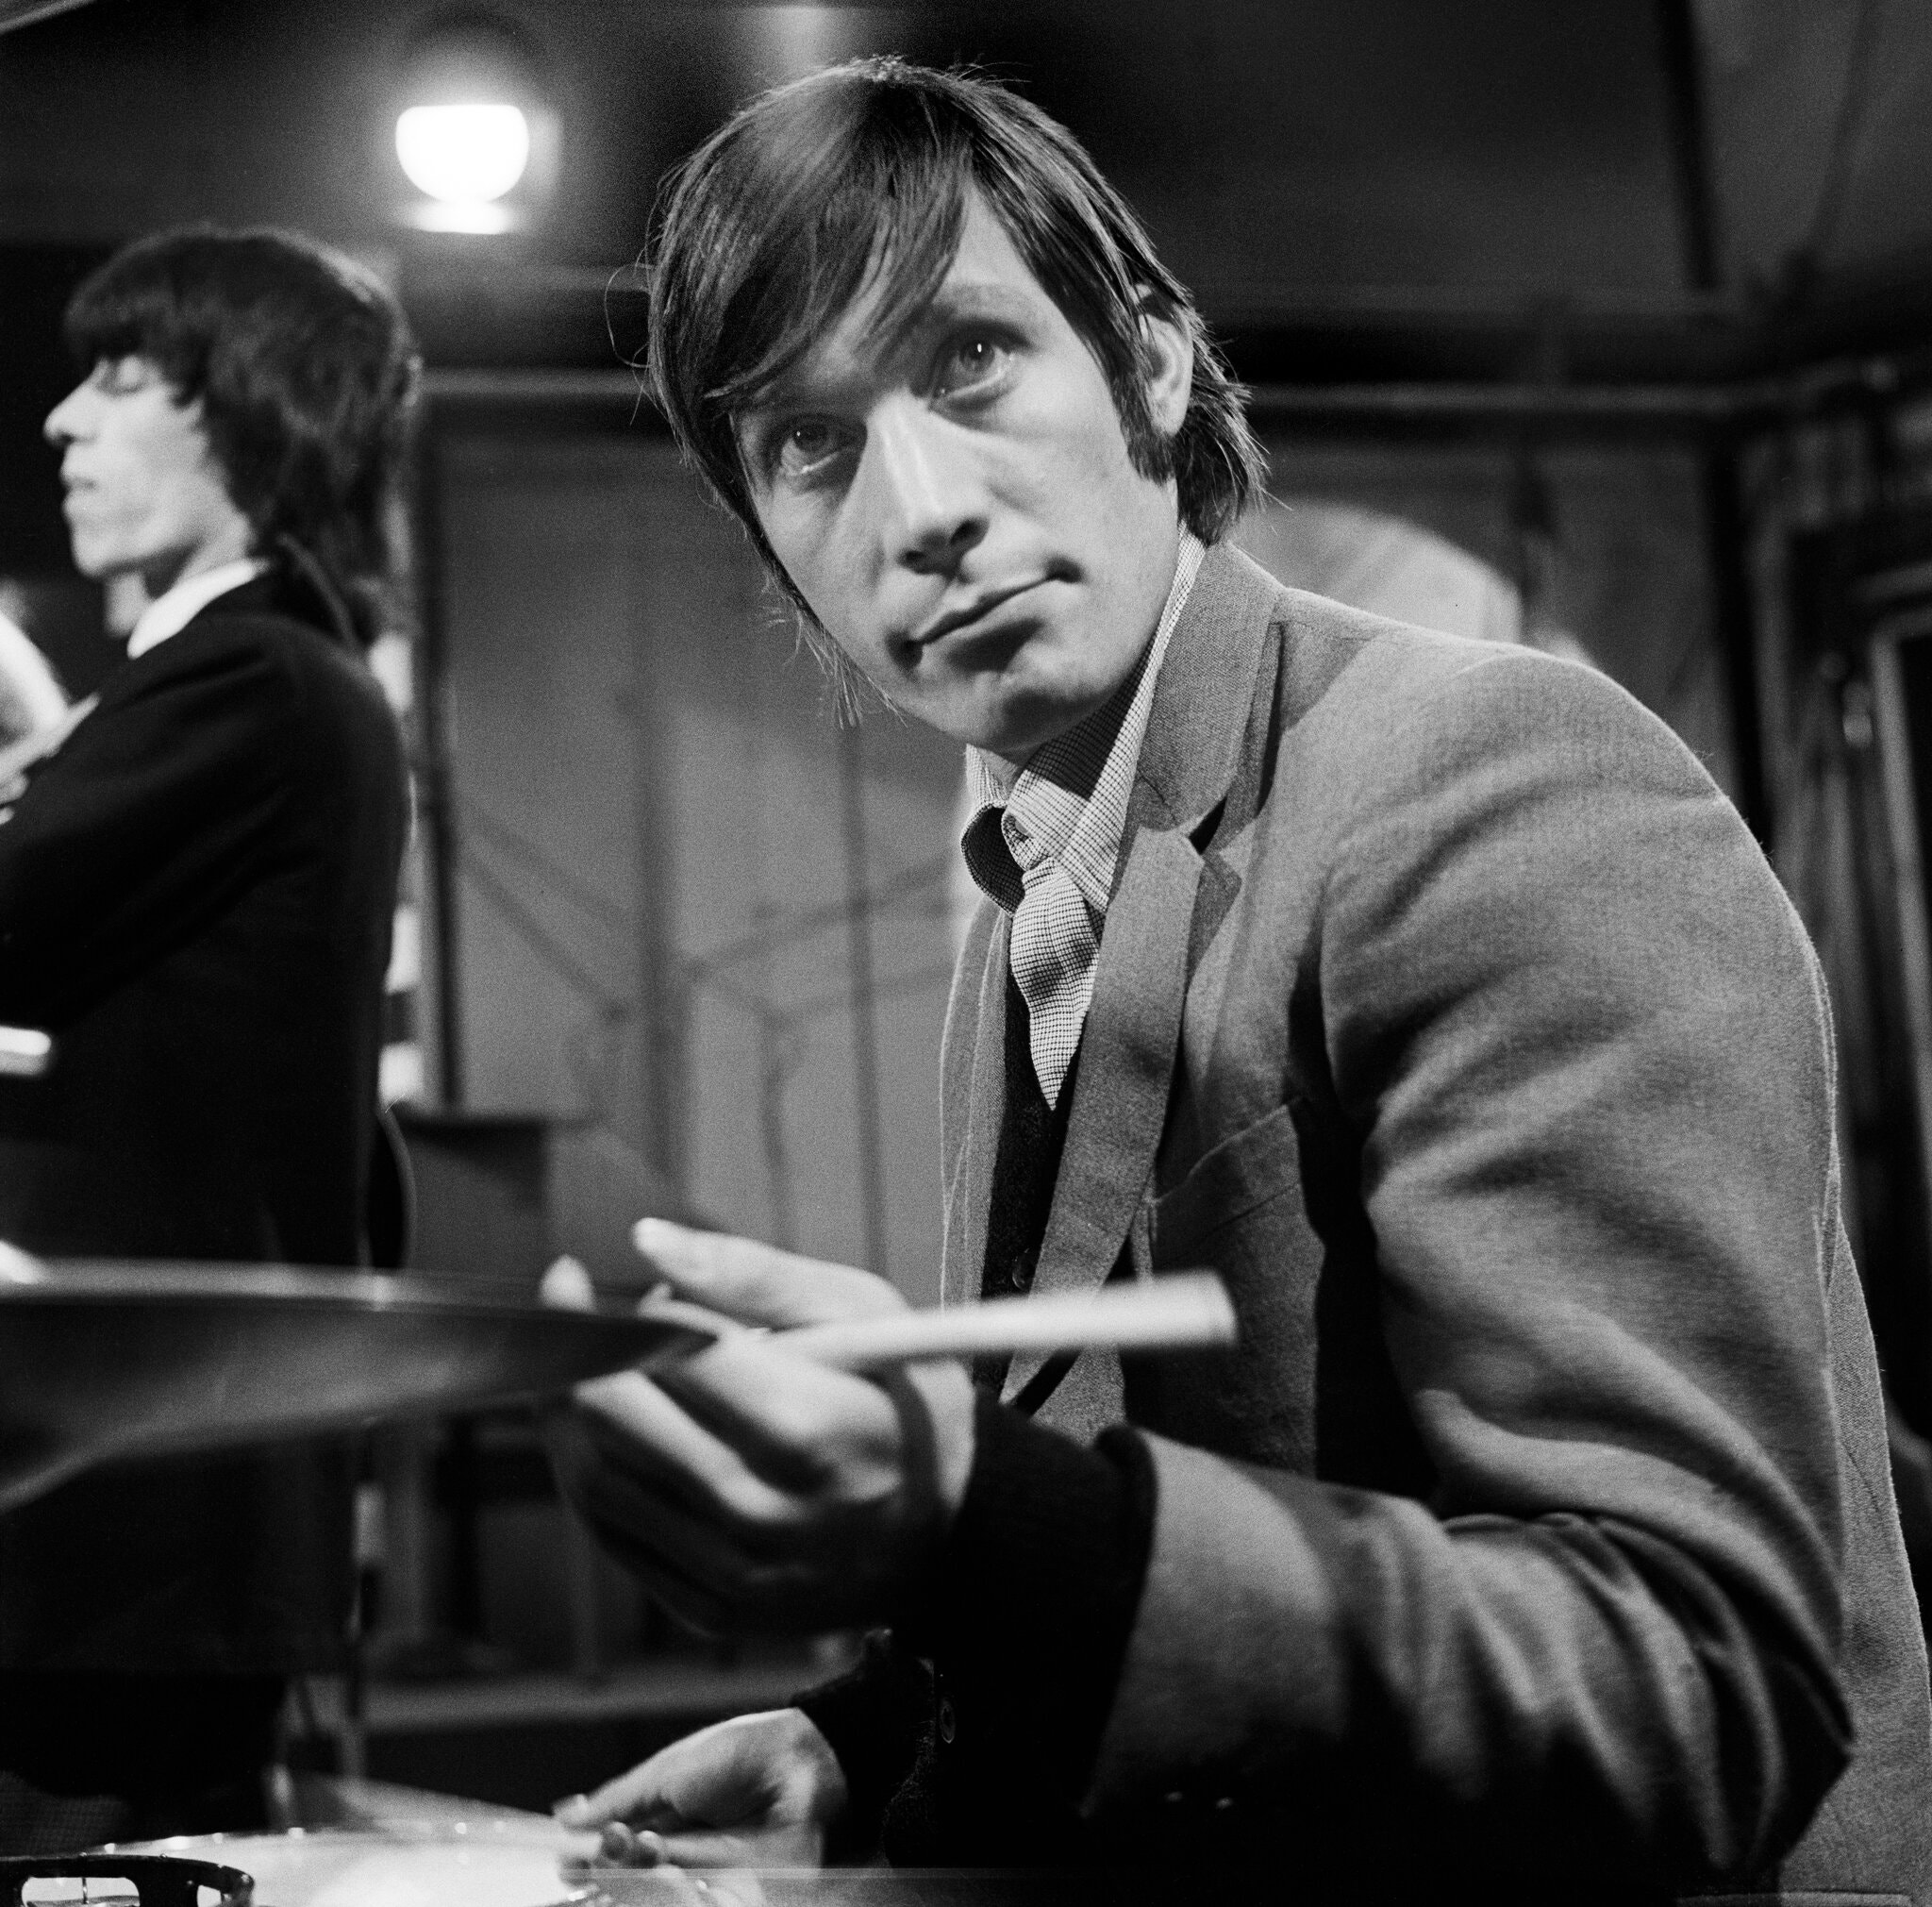 Young Charlie Watts drumming